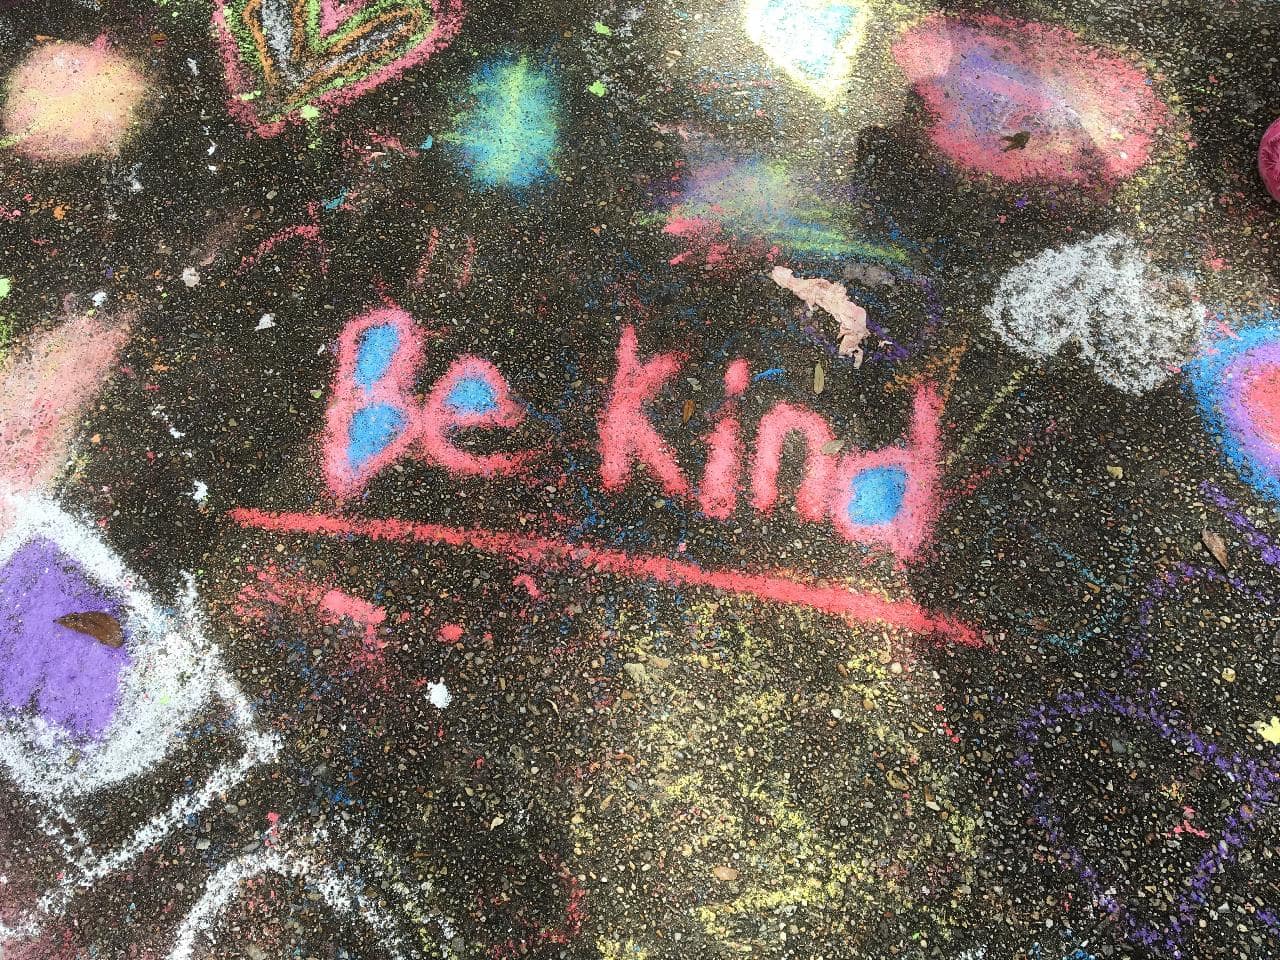 Encouragement to be kind.